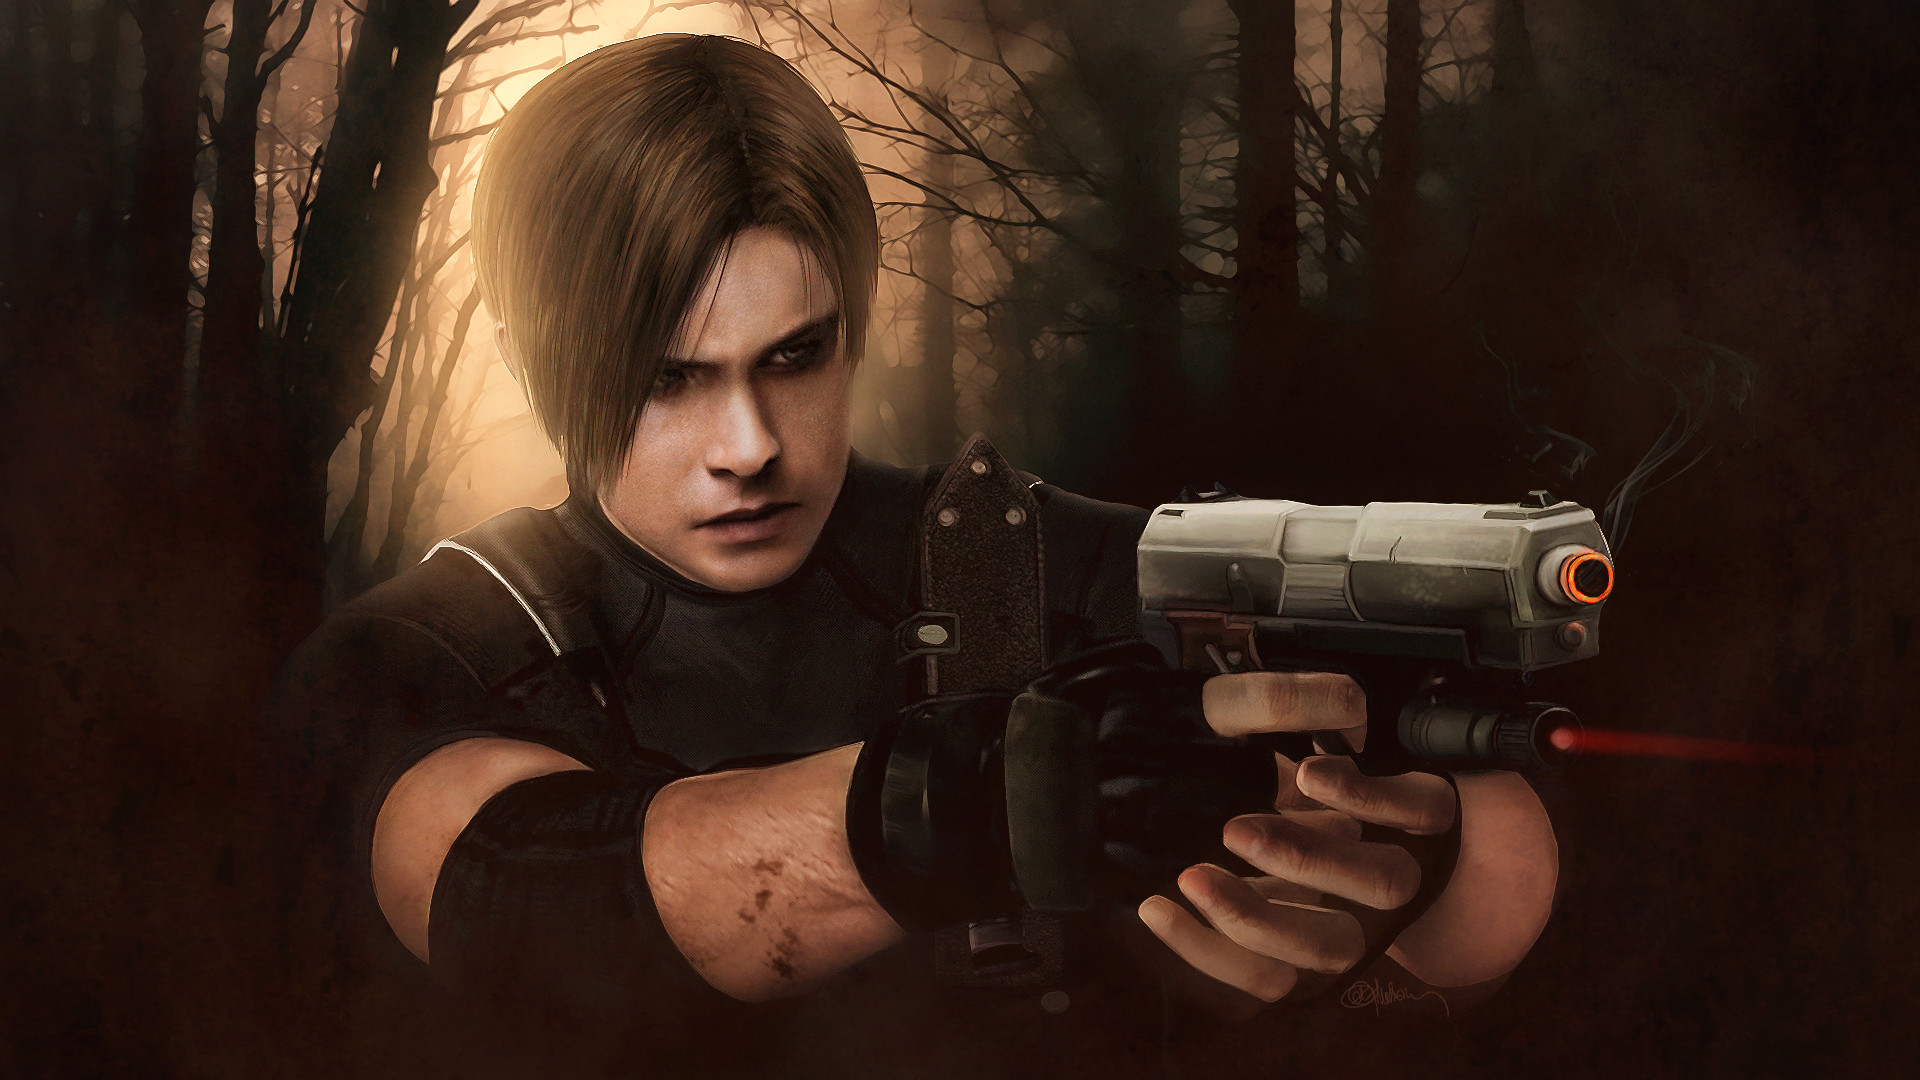 Leon S Kennedy 1080P 2k 4k HD wallpapers backgrounds free download   Rare Gallery